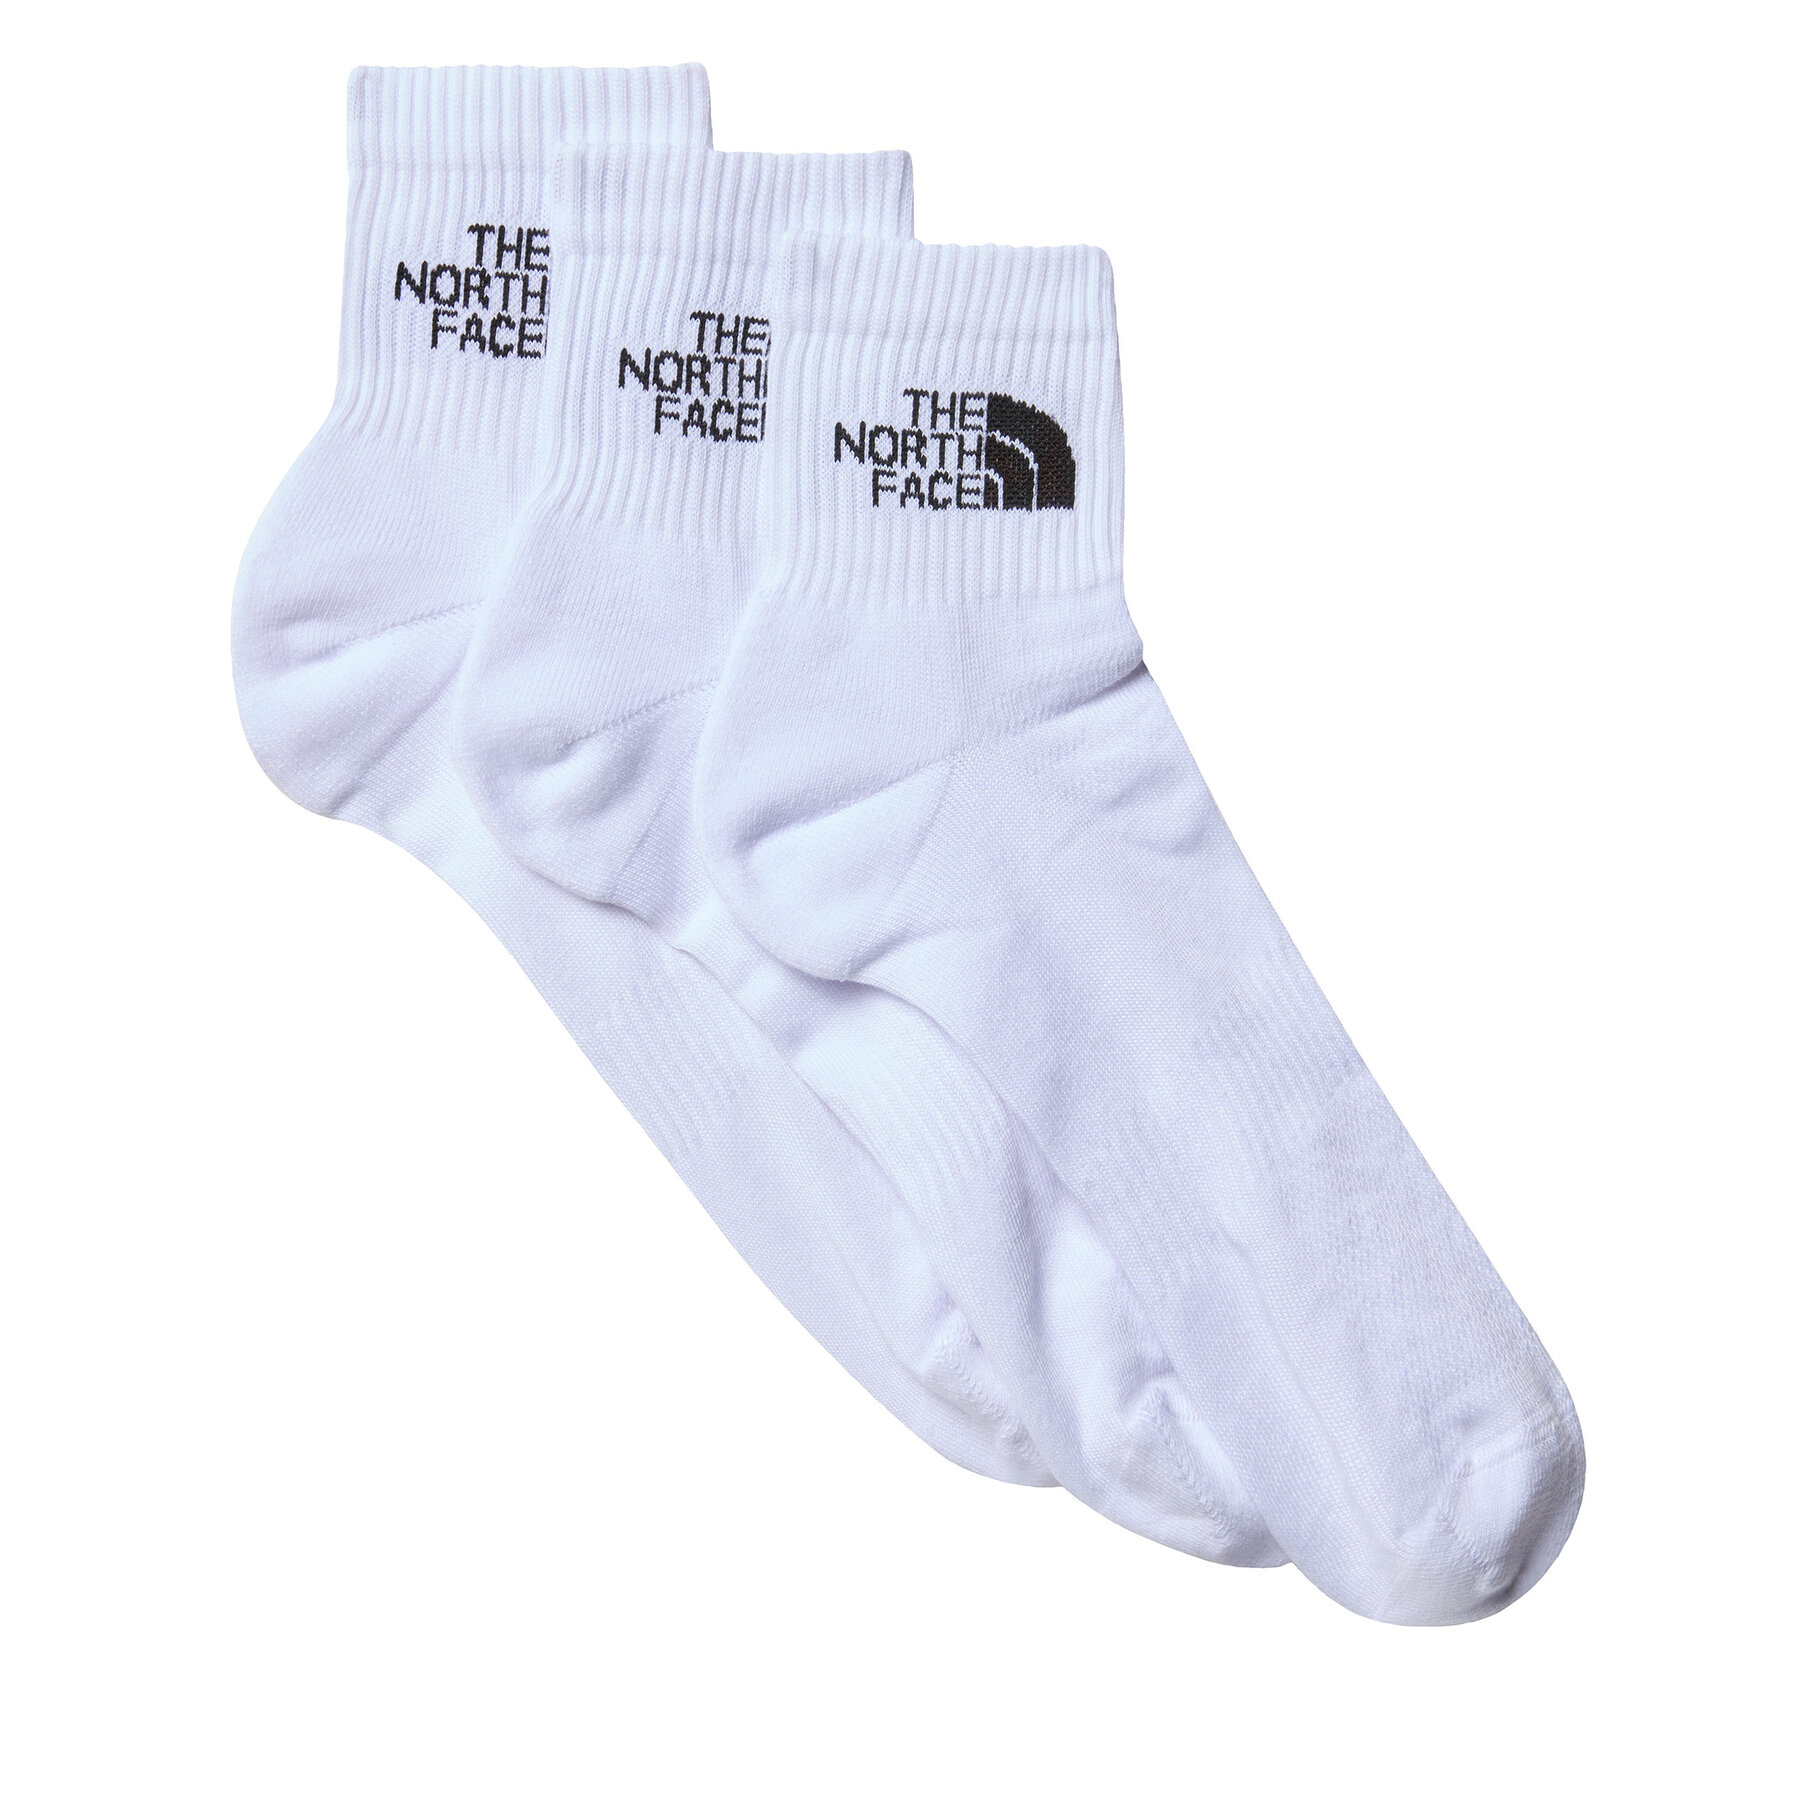 3er-Set hohe Herrensocken The North Face NF0A882GFN41 Tnf White von The North Face